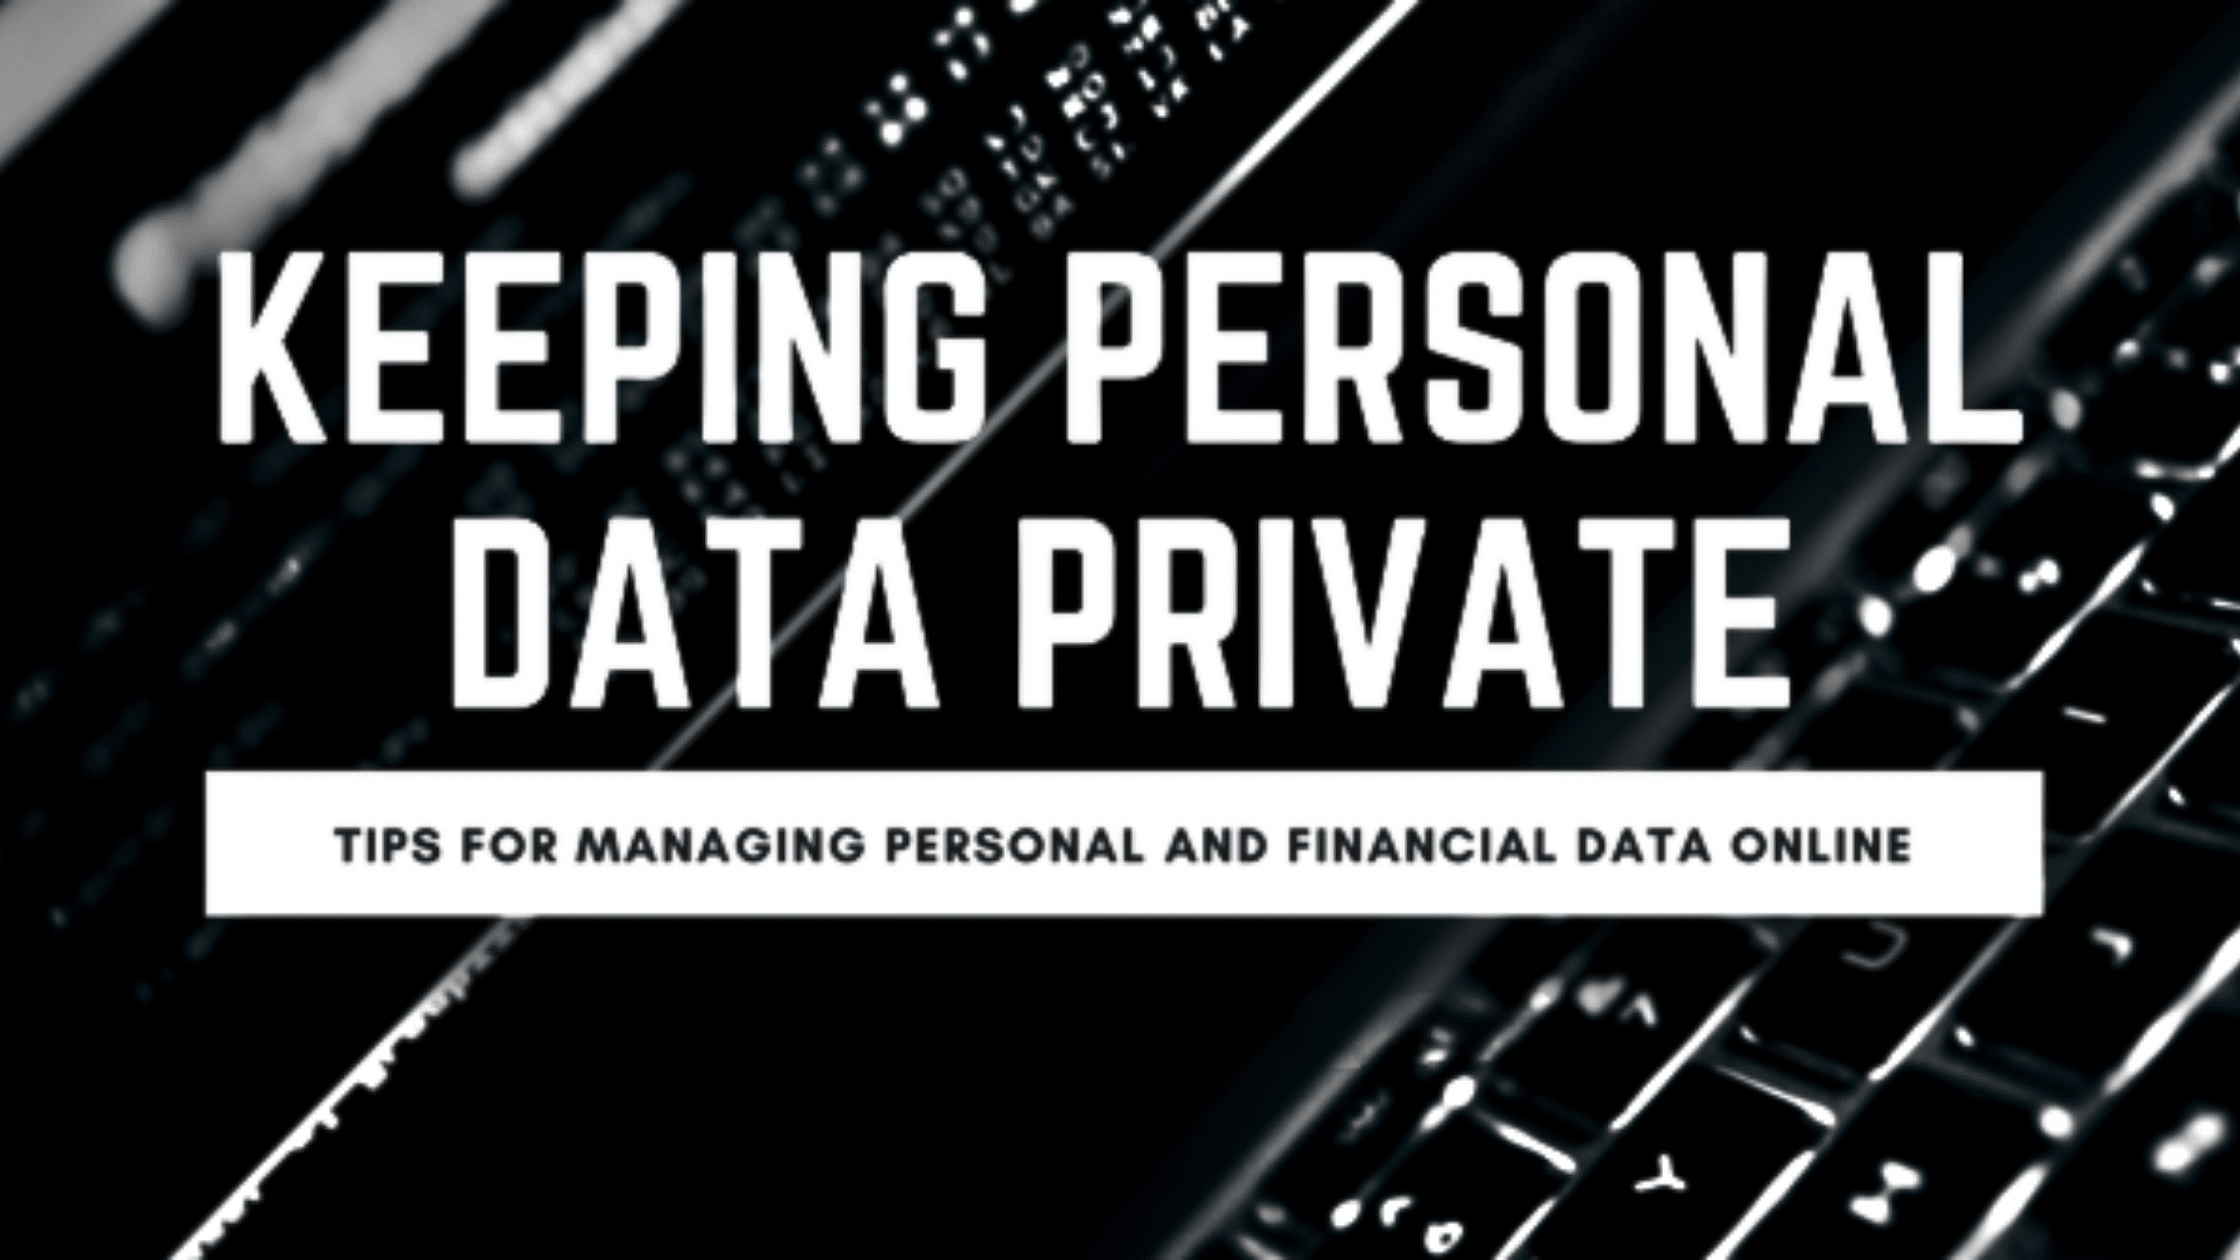 Keeping Personal Data Private